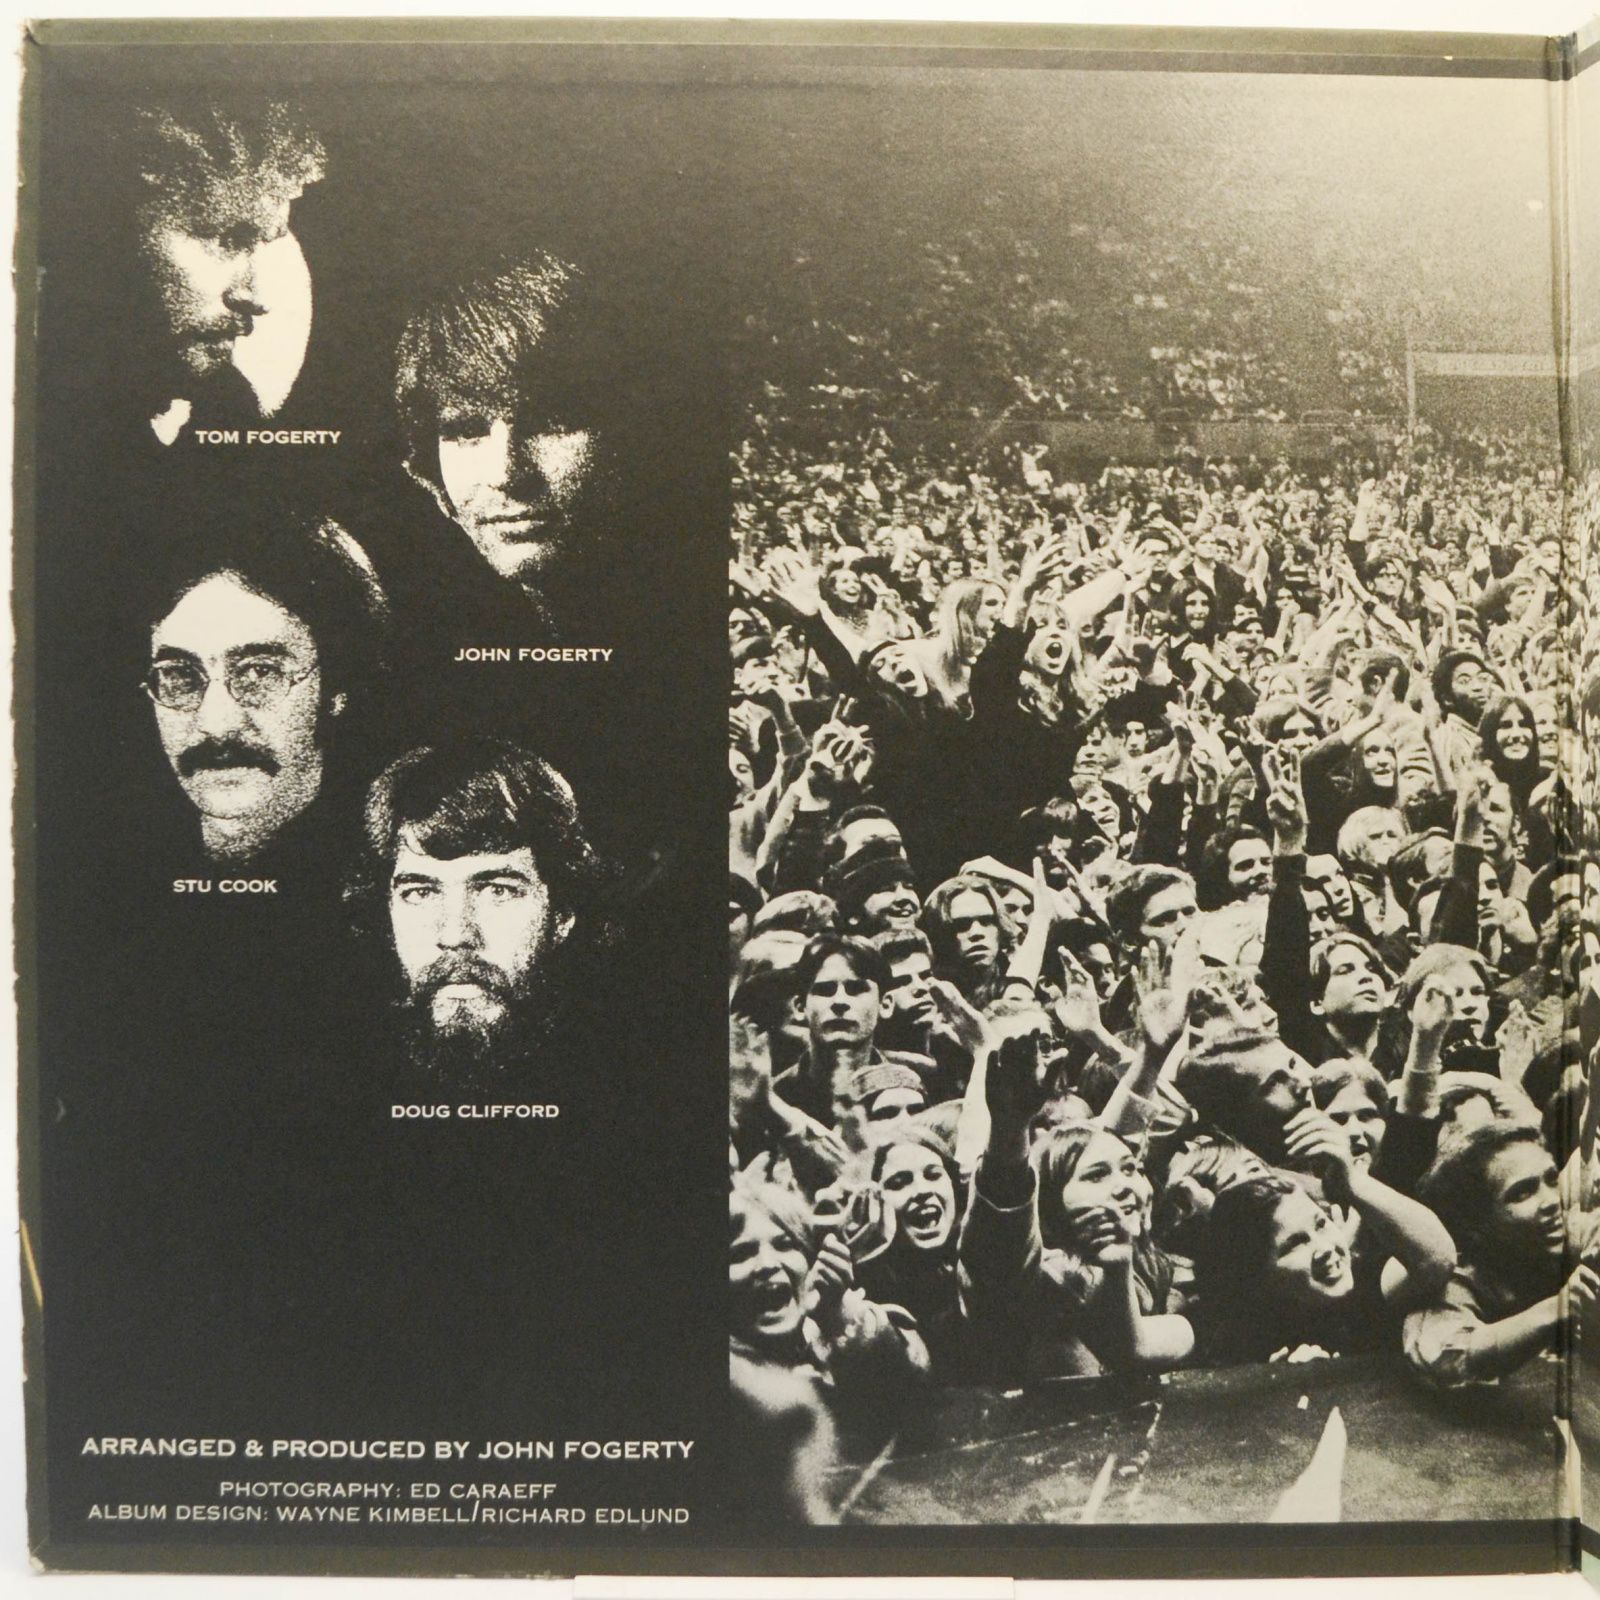 Creedence Clearwater Revival — Pendulum (1-st, USA), 1970